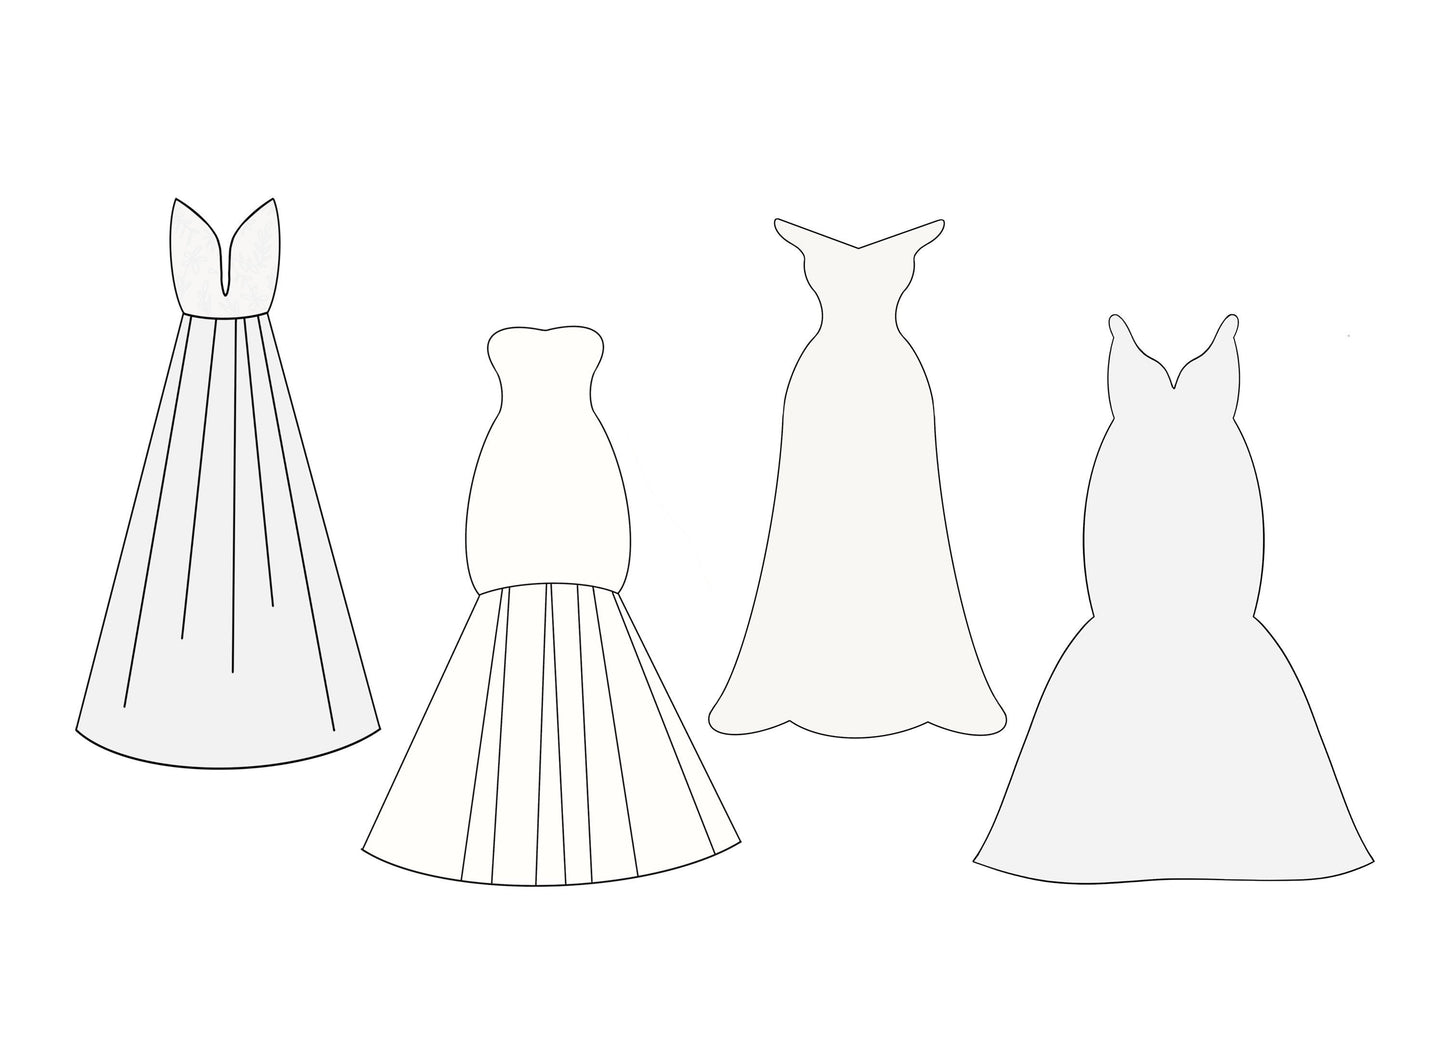 Wedding Dress 1, 2, 3, or 4 Cookie Cutters